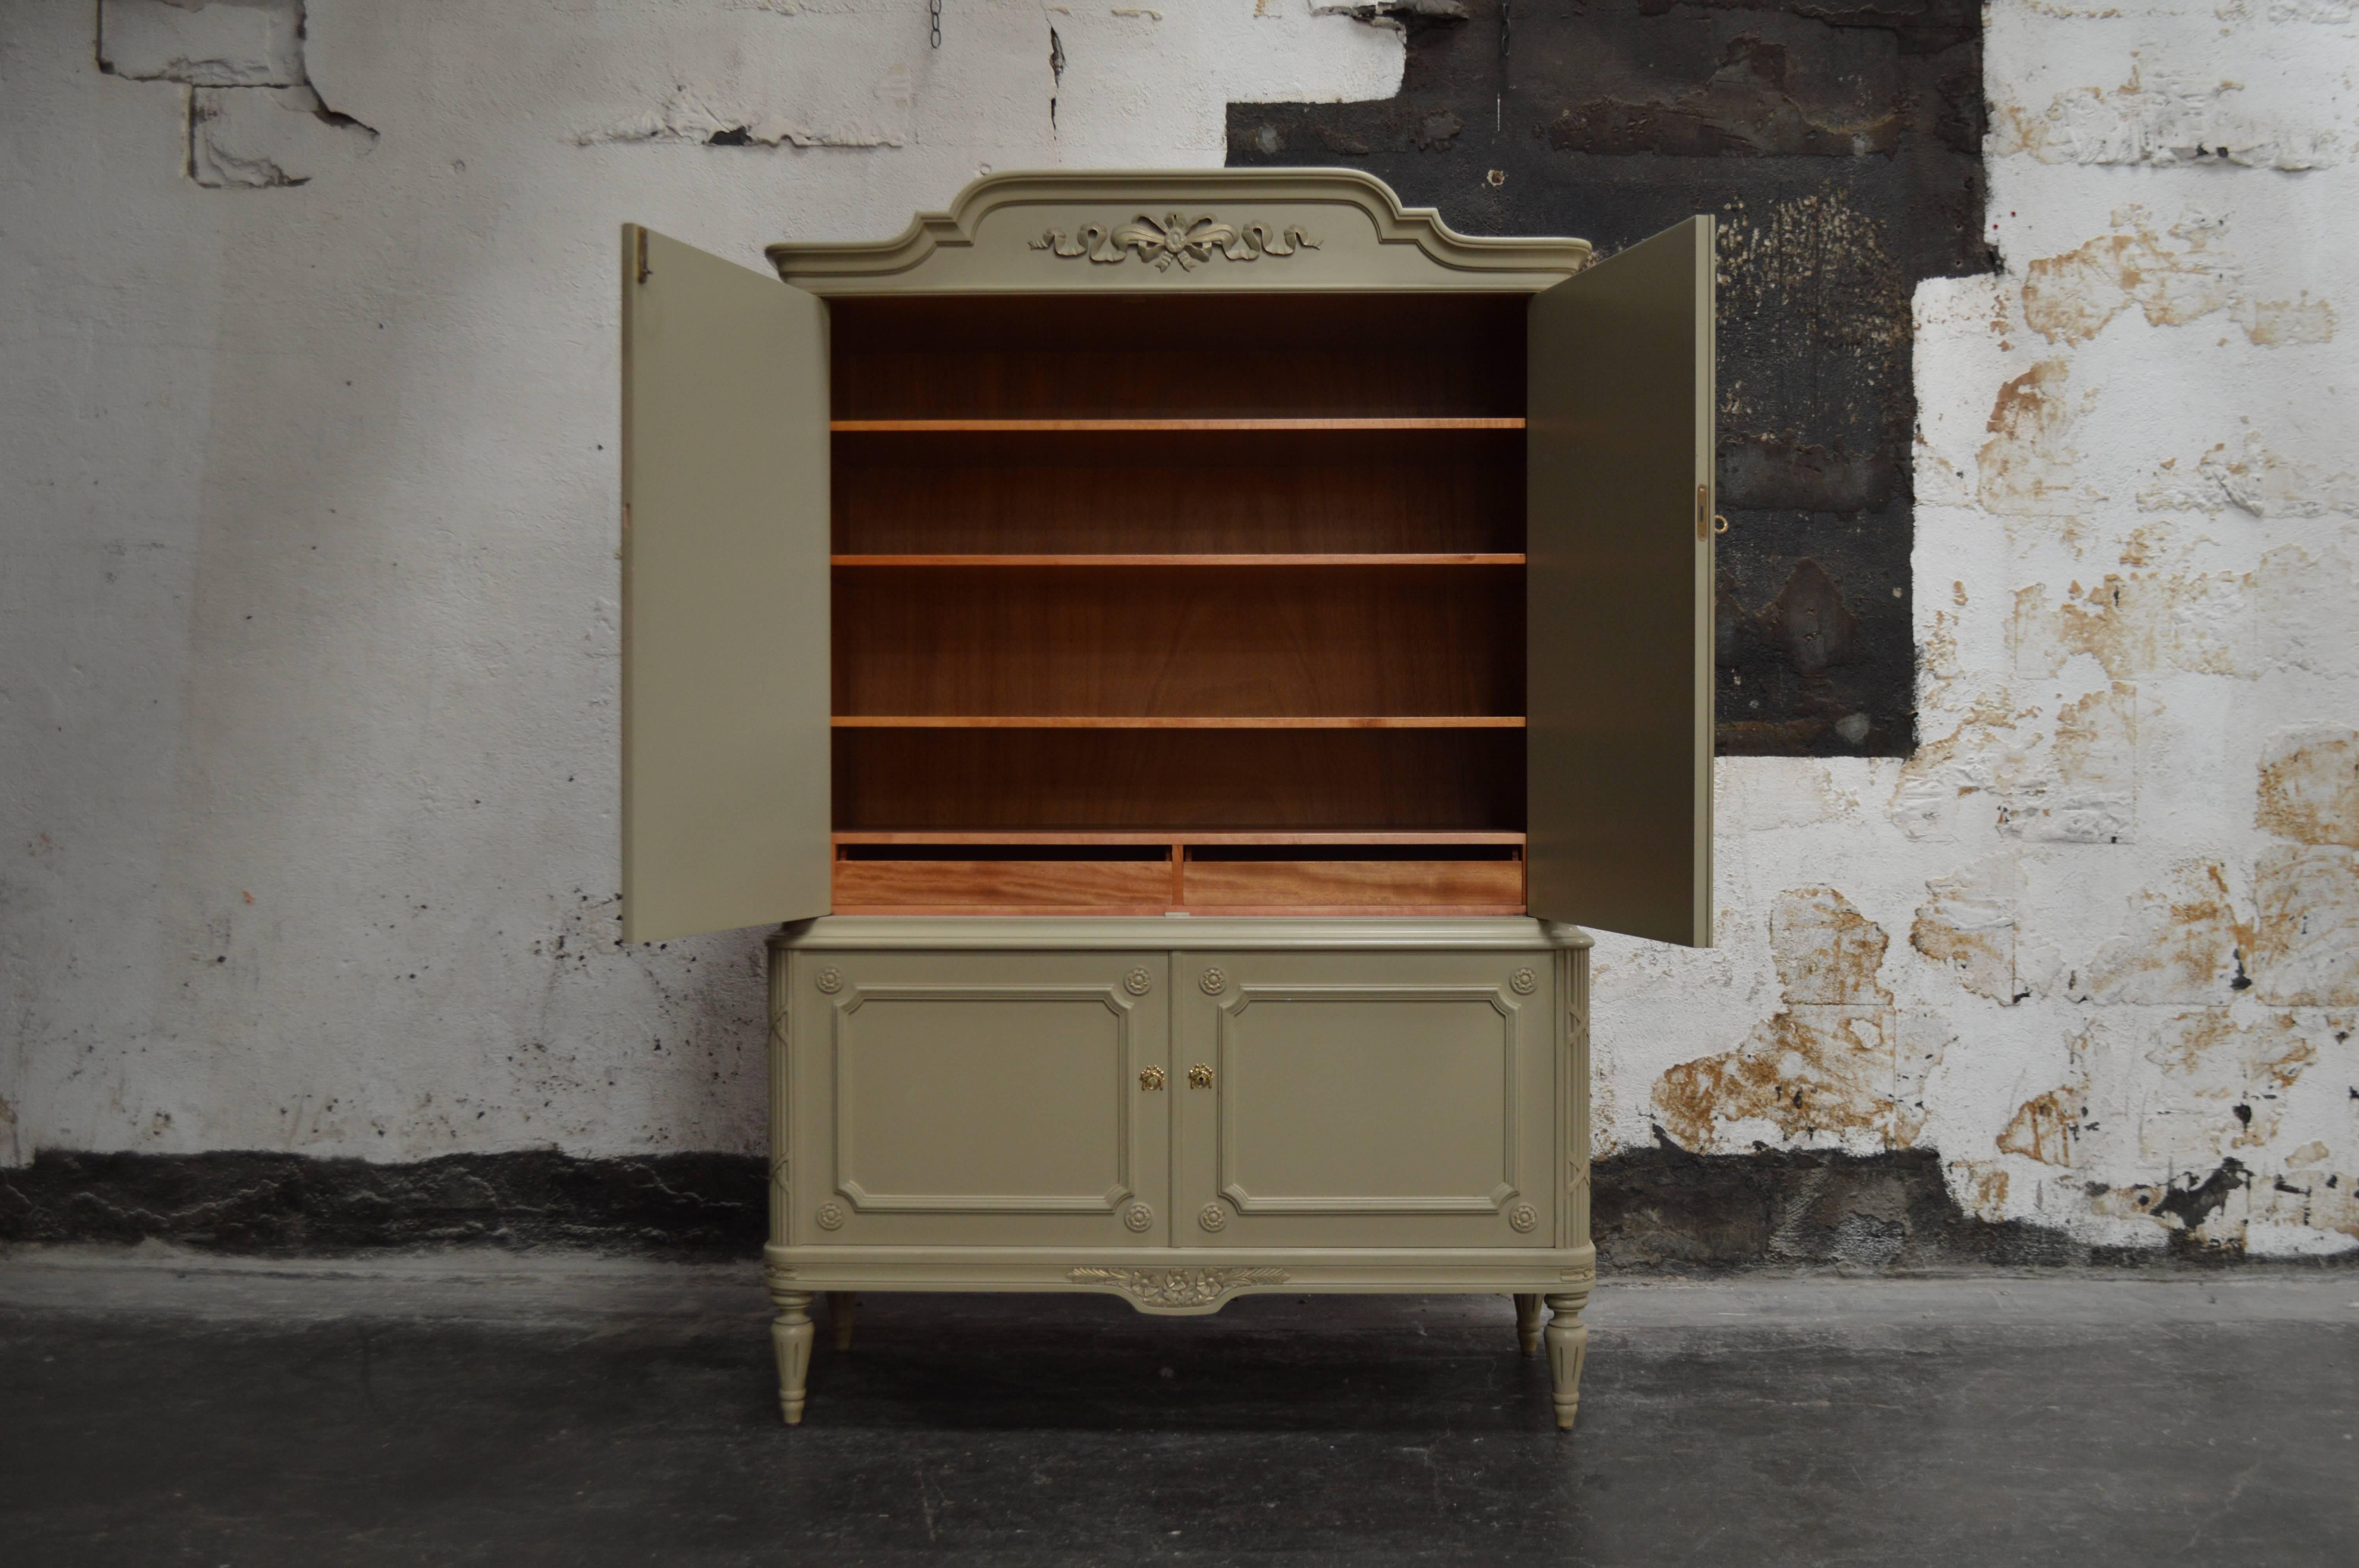 Gustavian Style grayish-greenish off-white painted storage cabinet. Adjustable shelves. Has contrasting unpainted wood interior with adjustable shelves and two small drawers on the top. This piece could be used in a bedroom, dining area or even in a